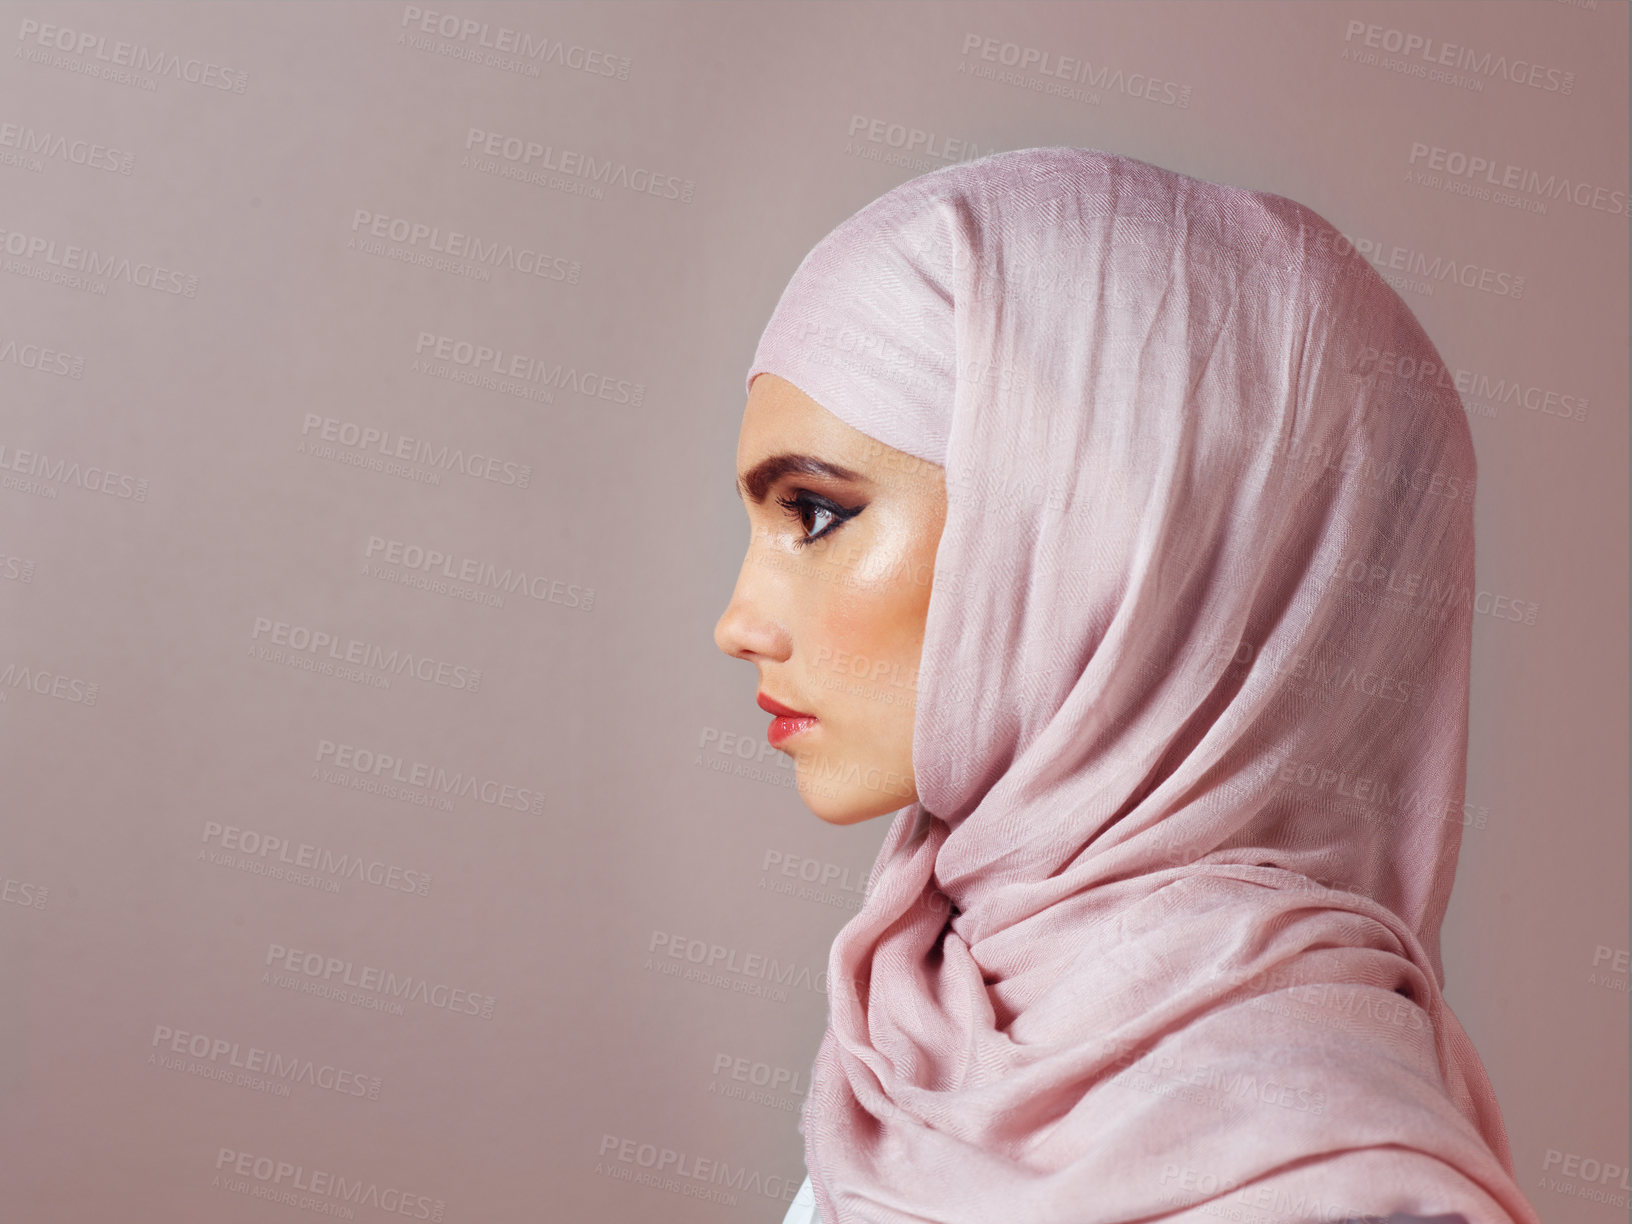 Buy stock photo Studio shot of a confident young woman wearing a colorful head scarf while posing against a grey background